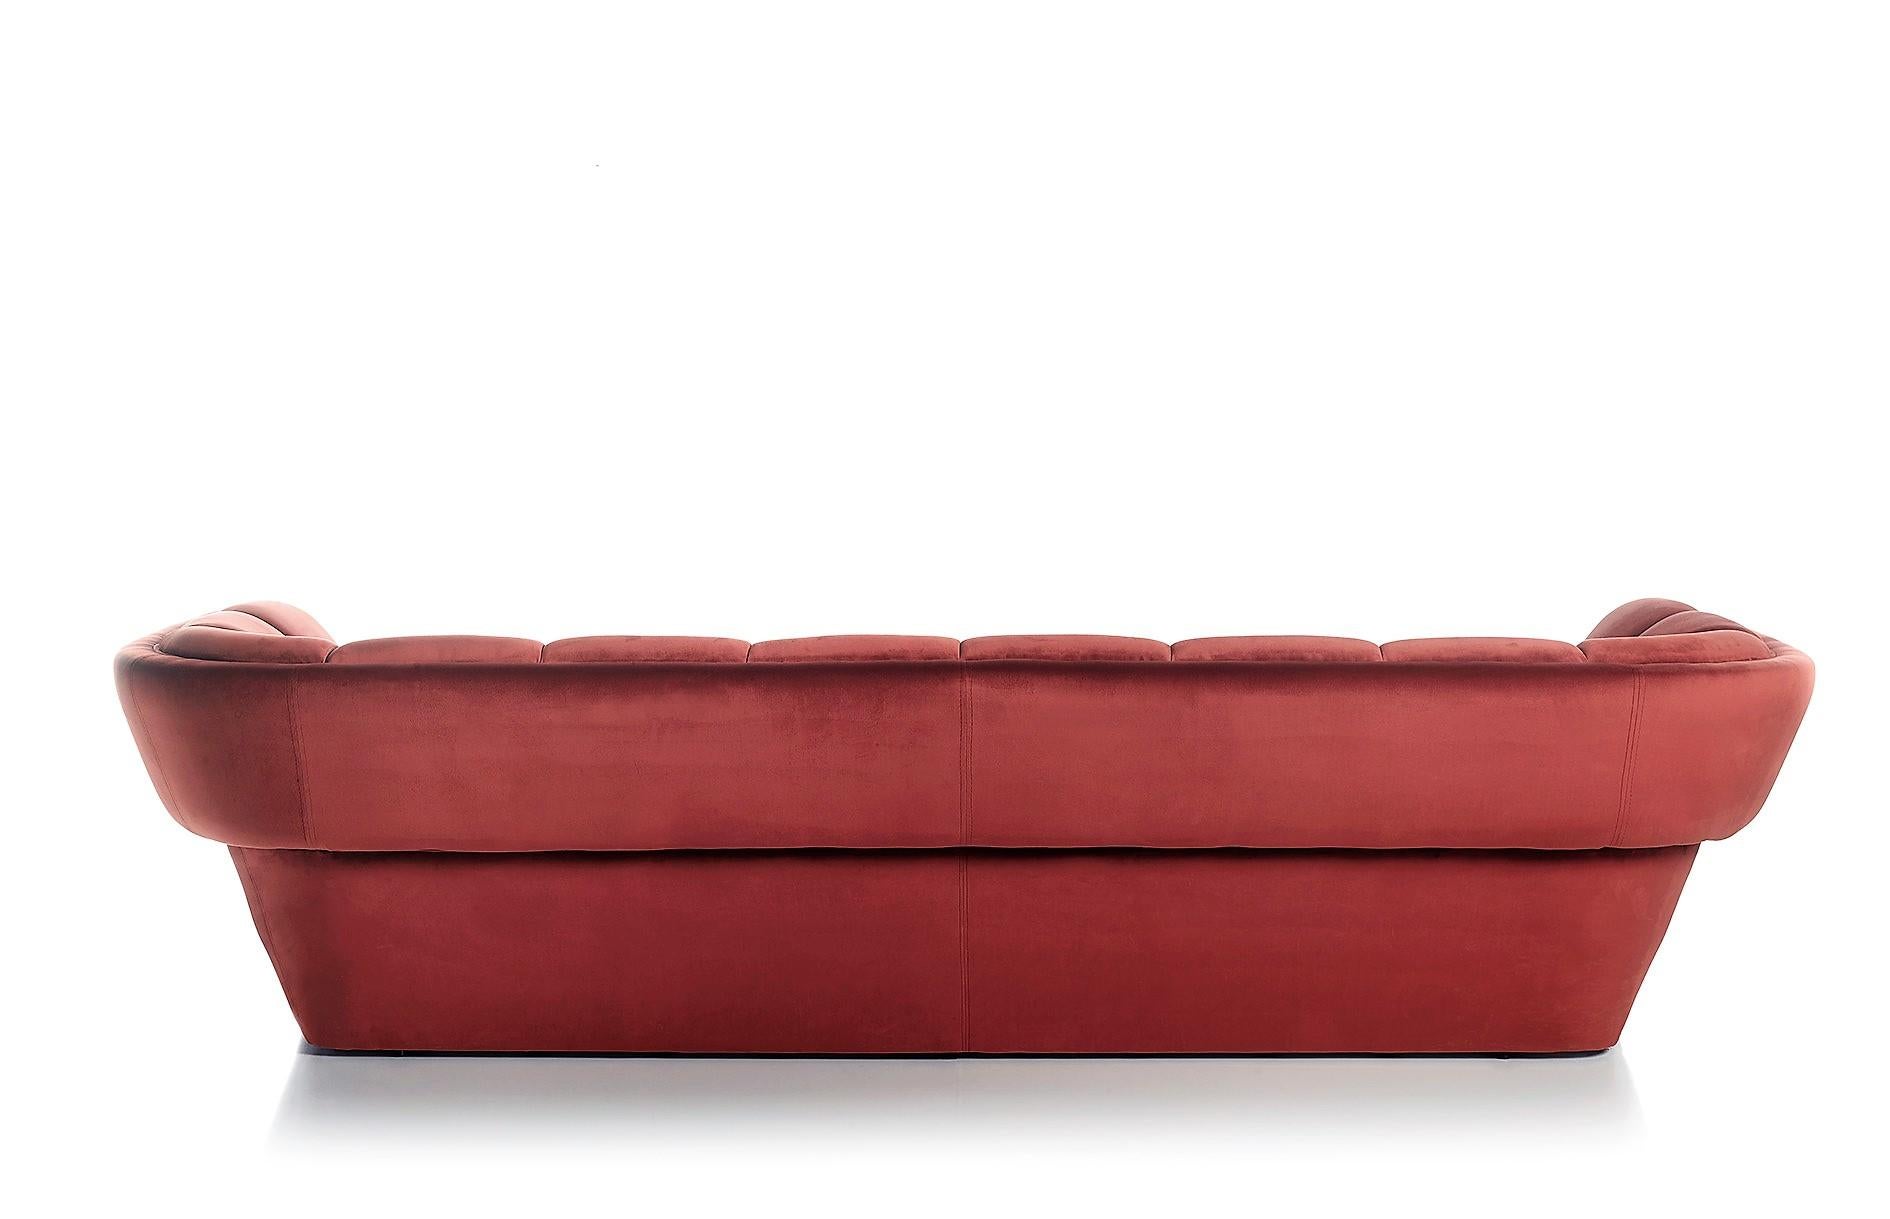 Exclusive and sophisticated design sofa, luxury and high decoration model bowie upholstered striped style in TAI MARSALA F2827 with elegant back.

Bowie is exclusive handcrafted furniture piece with a very personal philosophy with unique concept